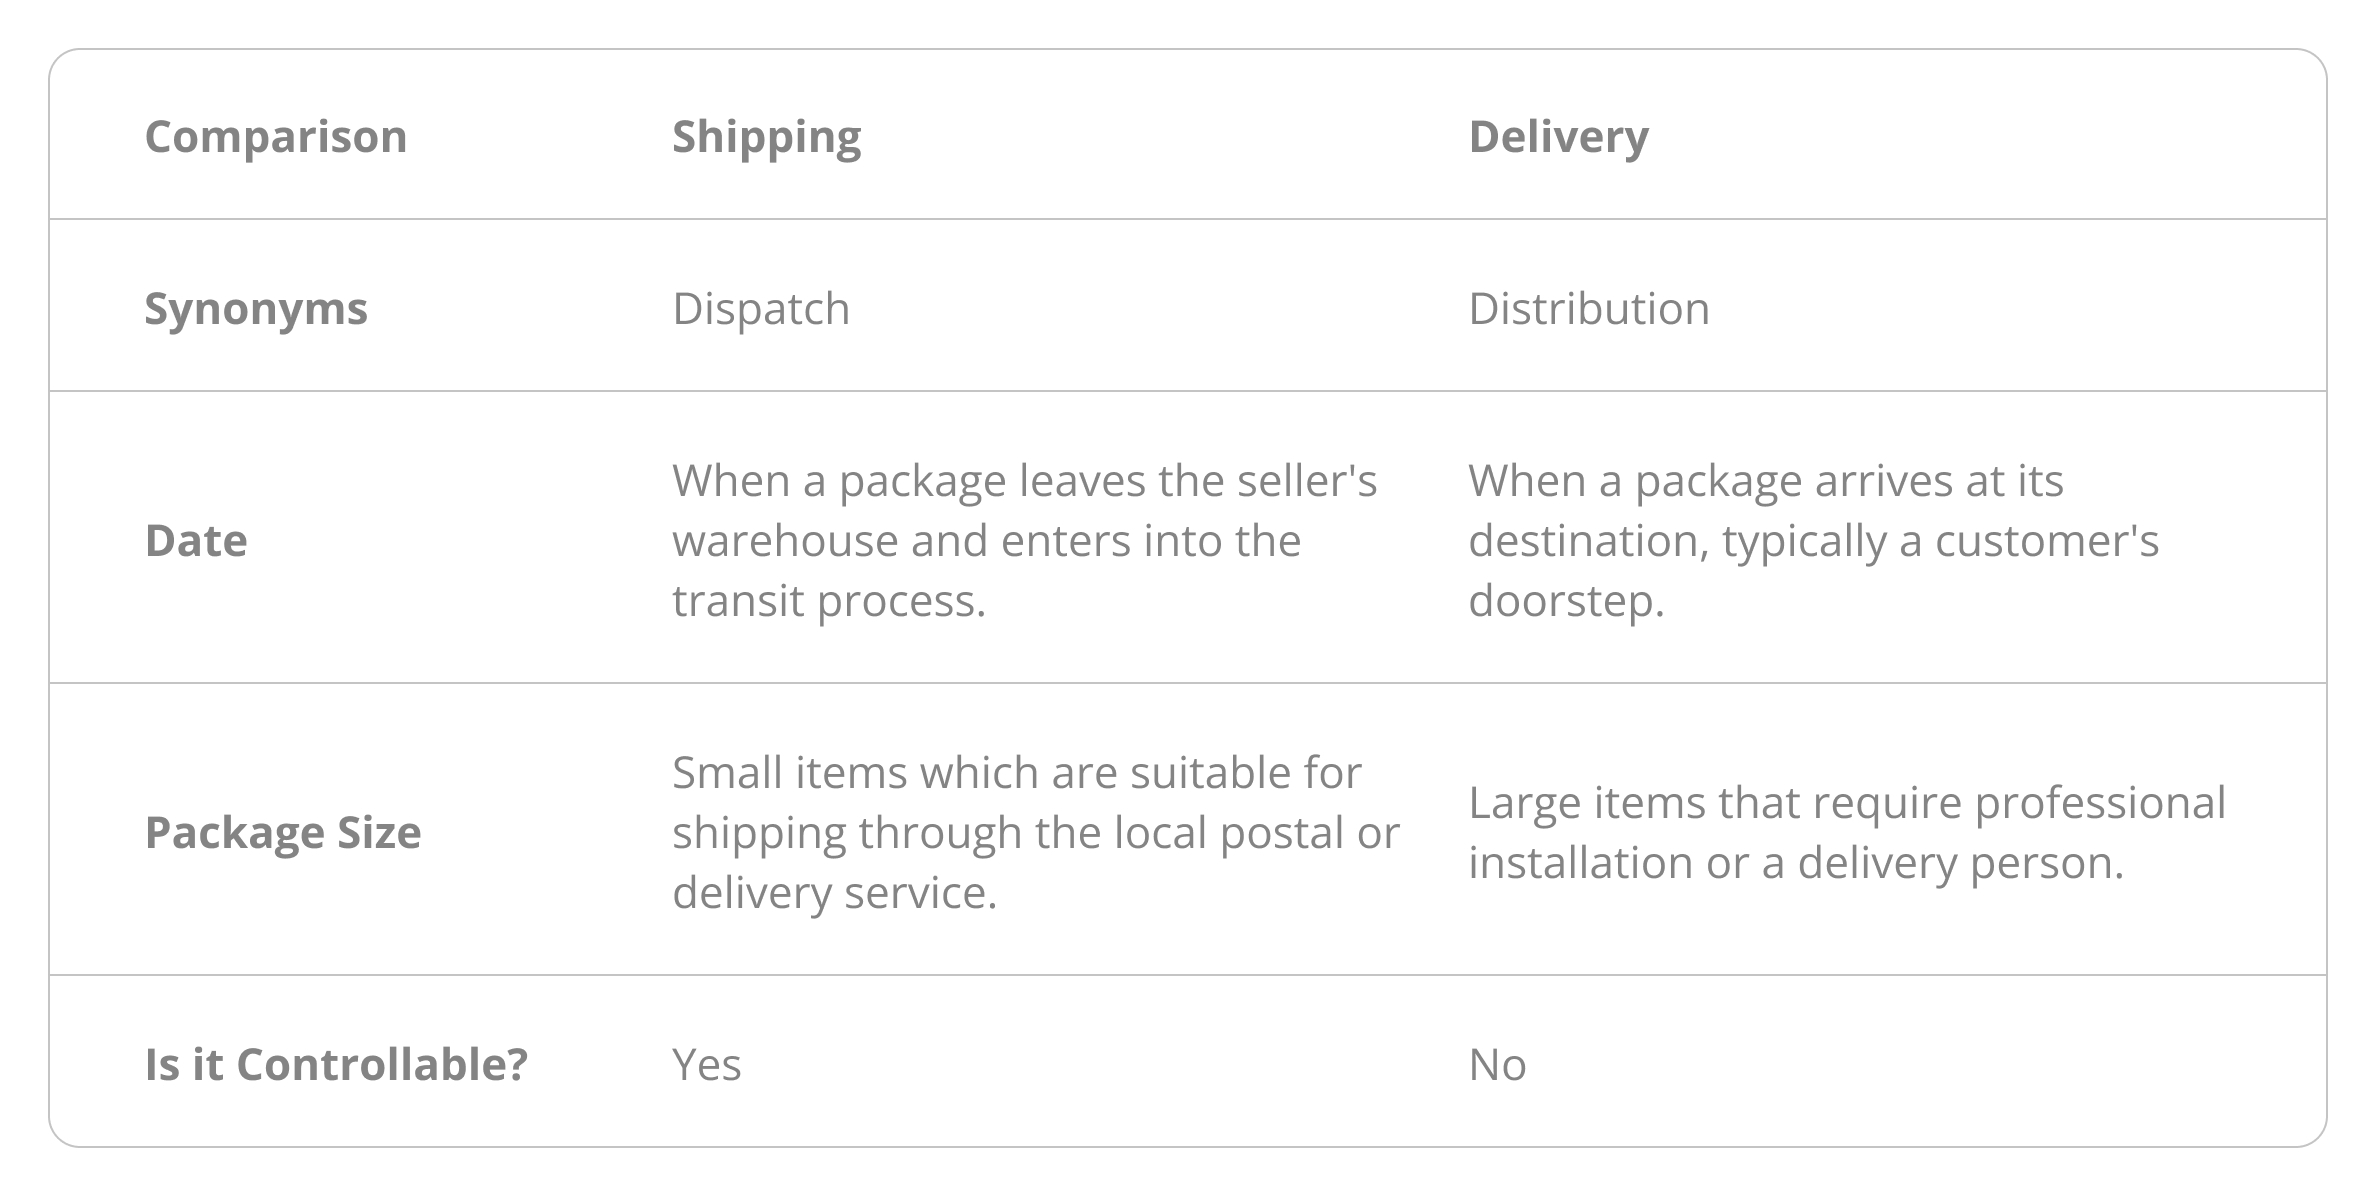 Table describing the differences between shipping and delivery